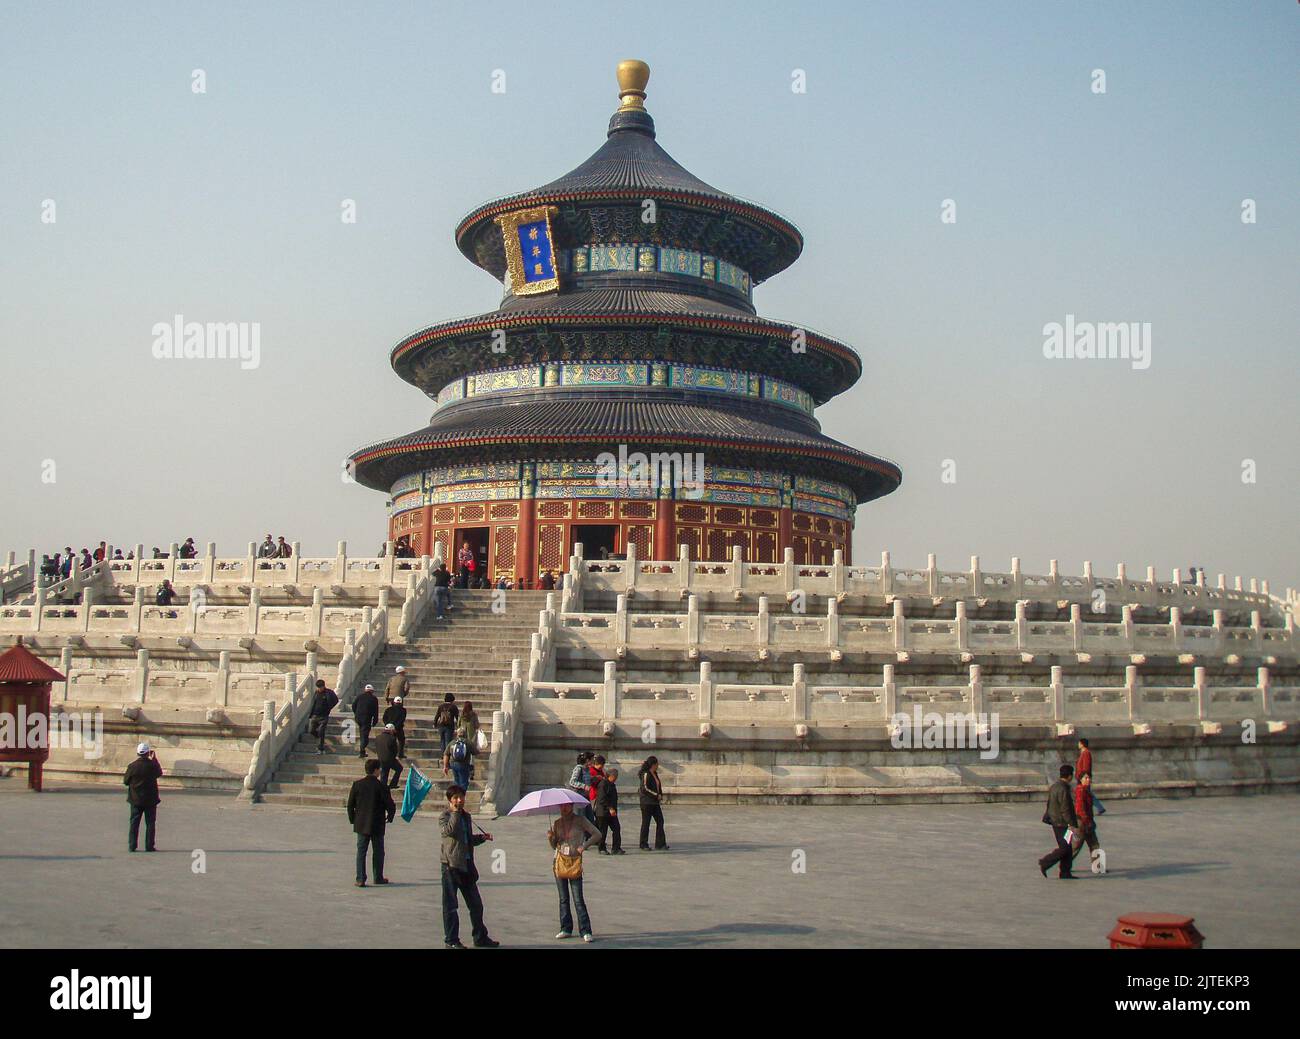 The Temple of Heaven is located south of the Forbidden City in Beijing ...